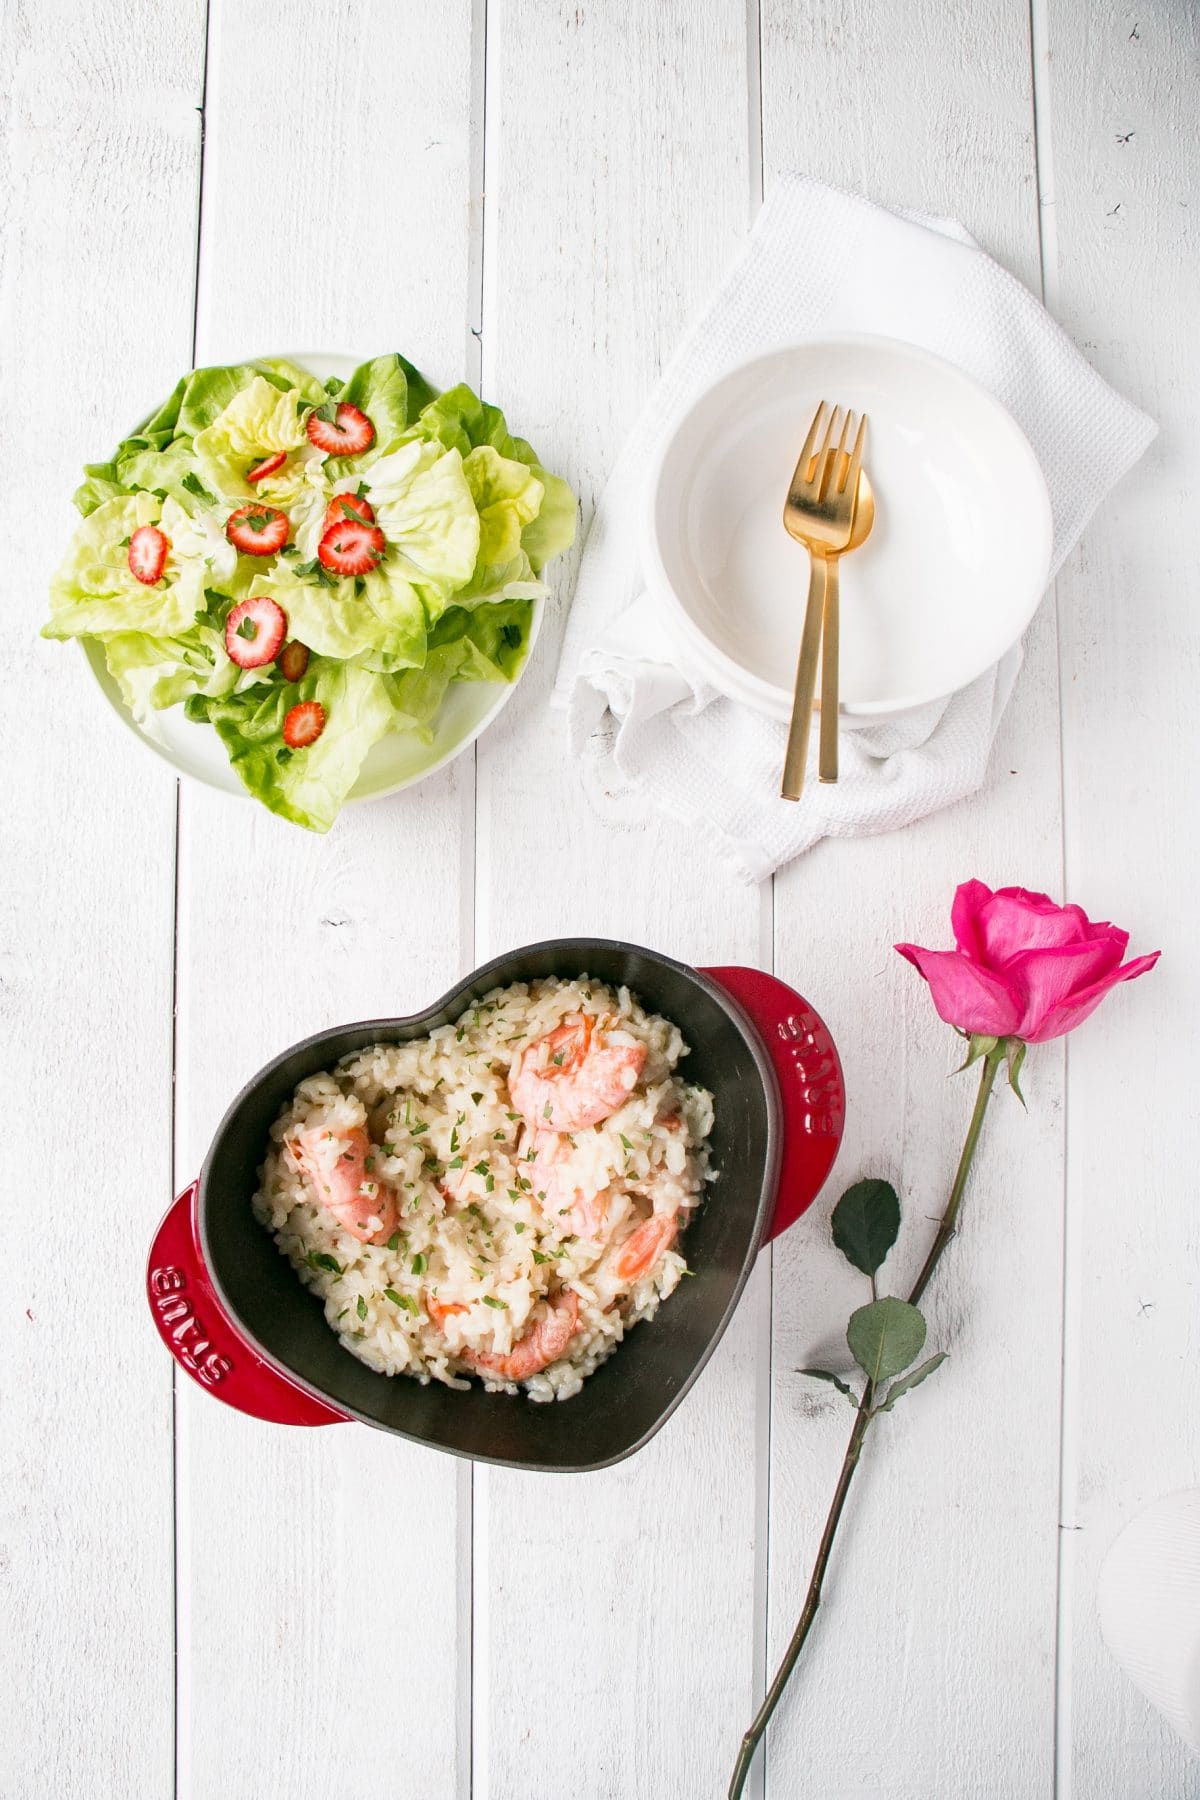 Make Date Night, special, delicious and relaxed with this Oven Baked Garlic Butter Prawn Risotto. #valentinesday #risotto #datenight #rice #seafood